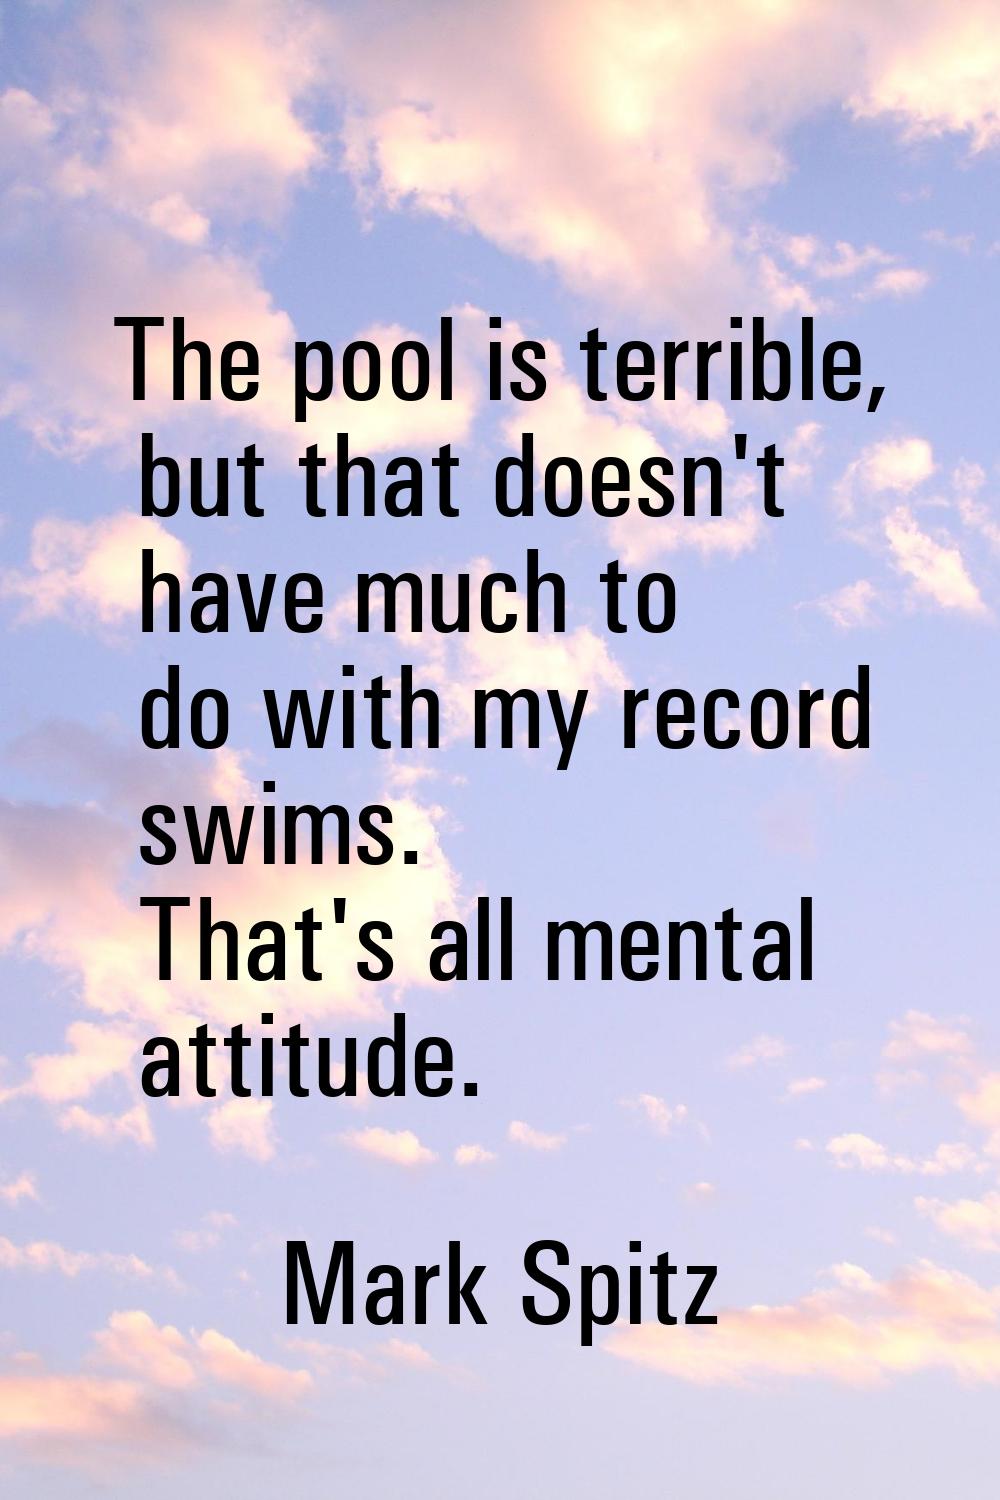 The pool is terrible, but that doesn't have much to do with my record swims. That's all mental atti